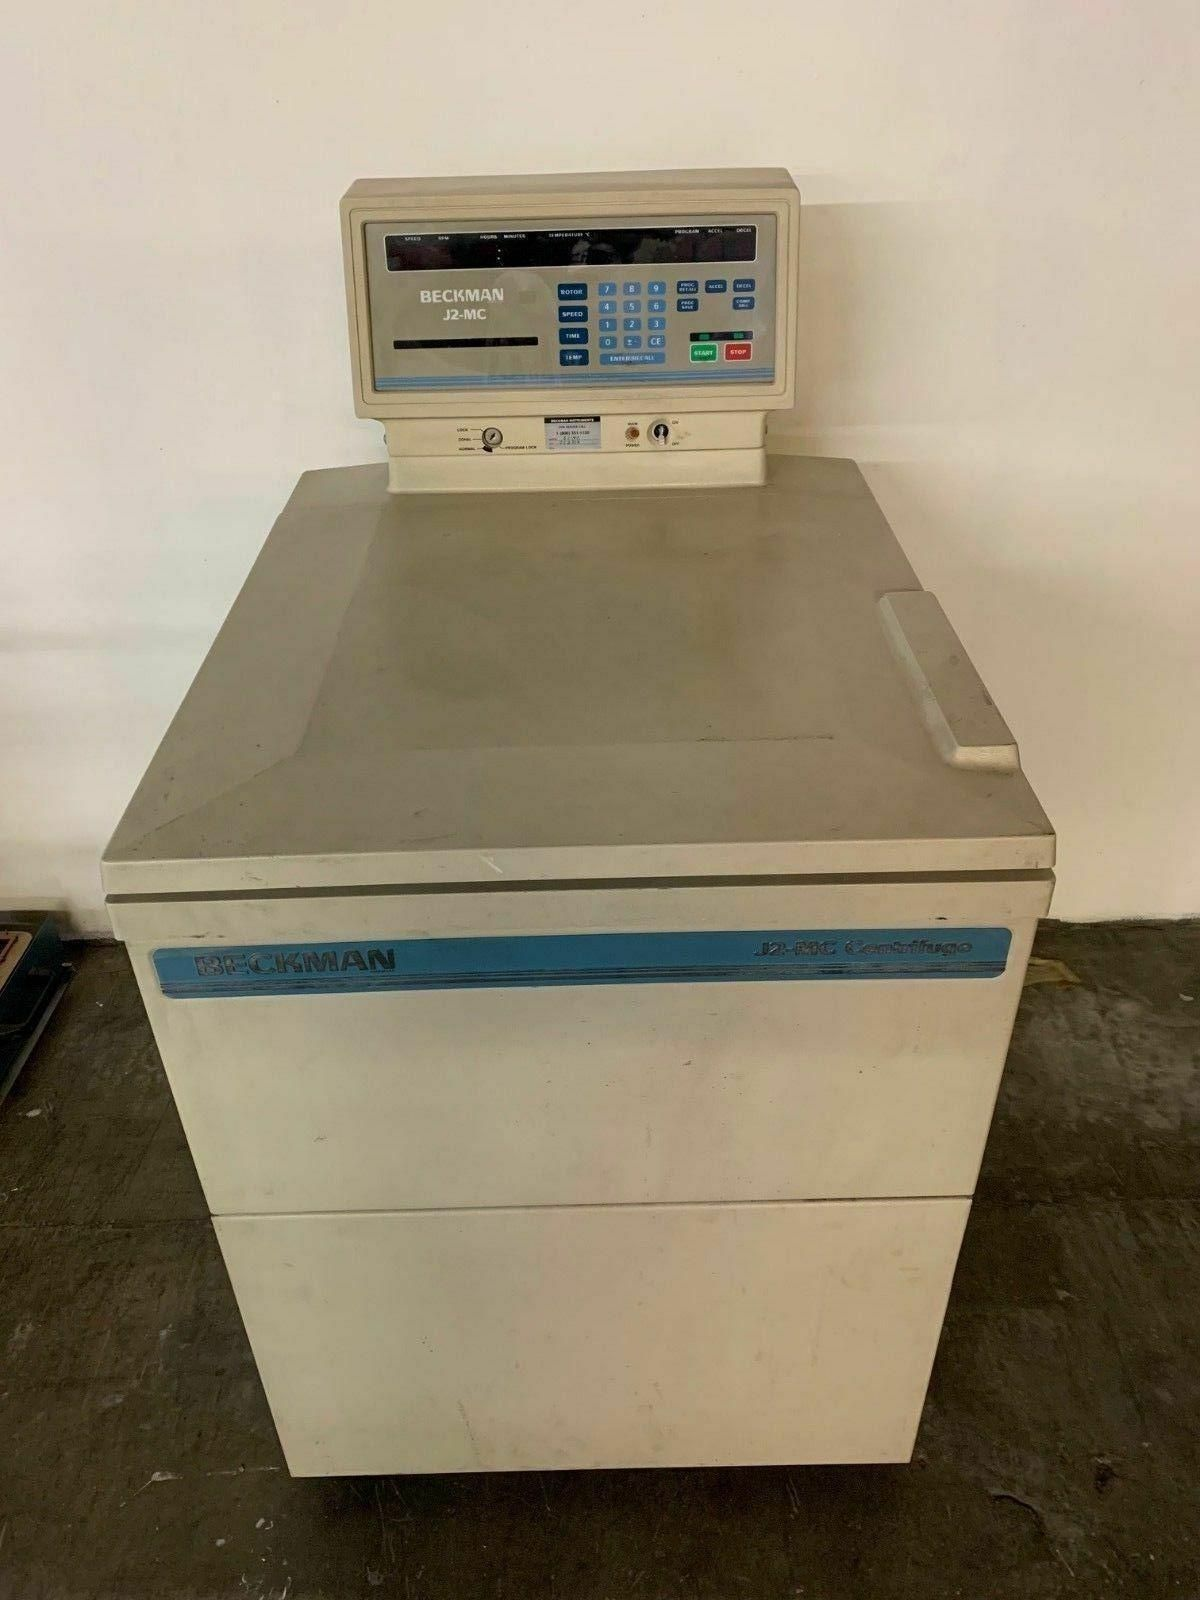 Beckman Coulter J2-MC Refrigerated Centrifuge with Two rotors and Warranty